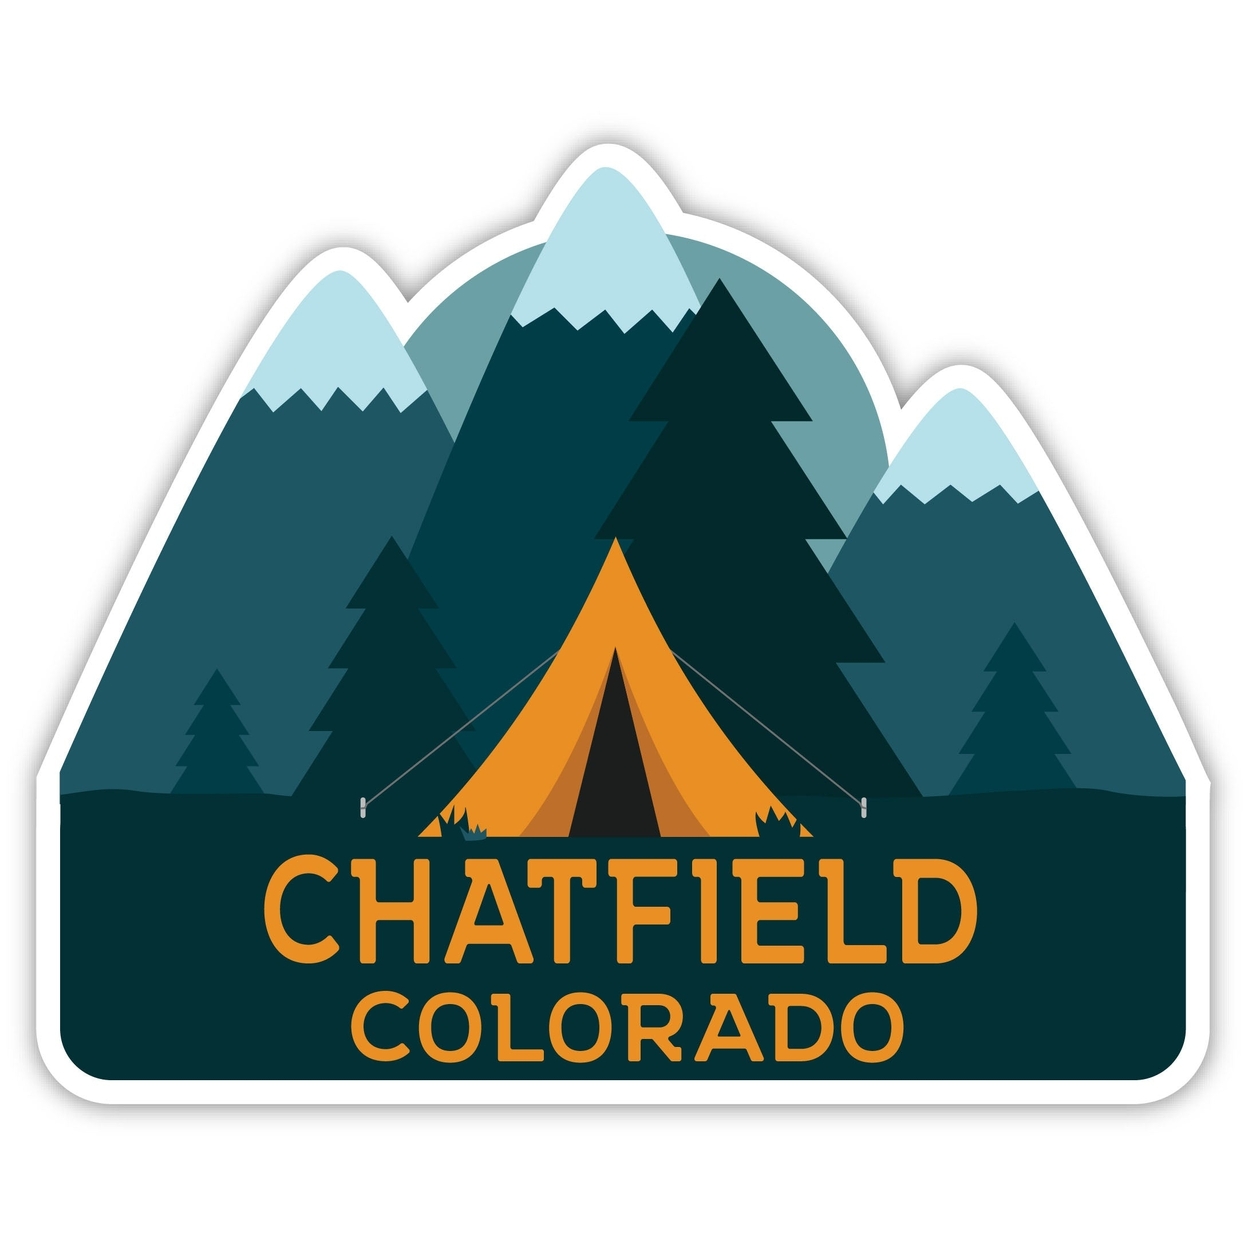 Chatfield Colorado Souvenir Decorative Stickers (Choose Theme And Size) - 4-Pack, 10-Inch, Tent